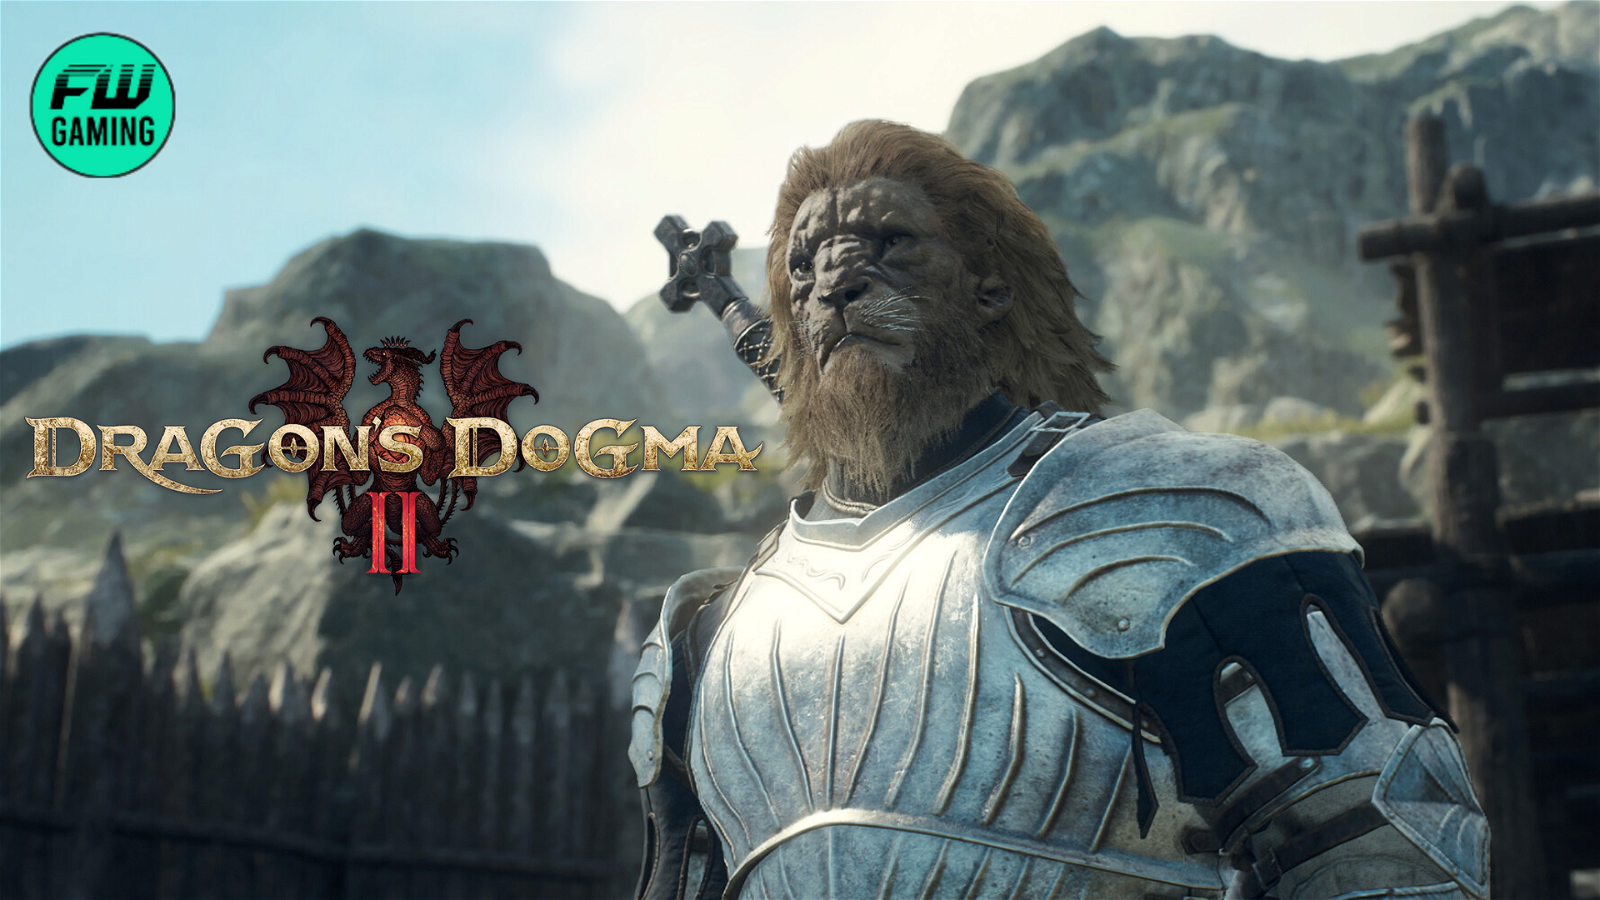 Dragon’s Dogma 2 Feature Could Make for a Hard Time for Some Players